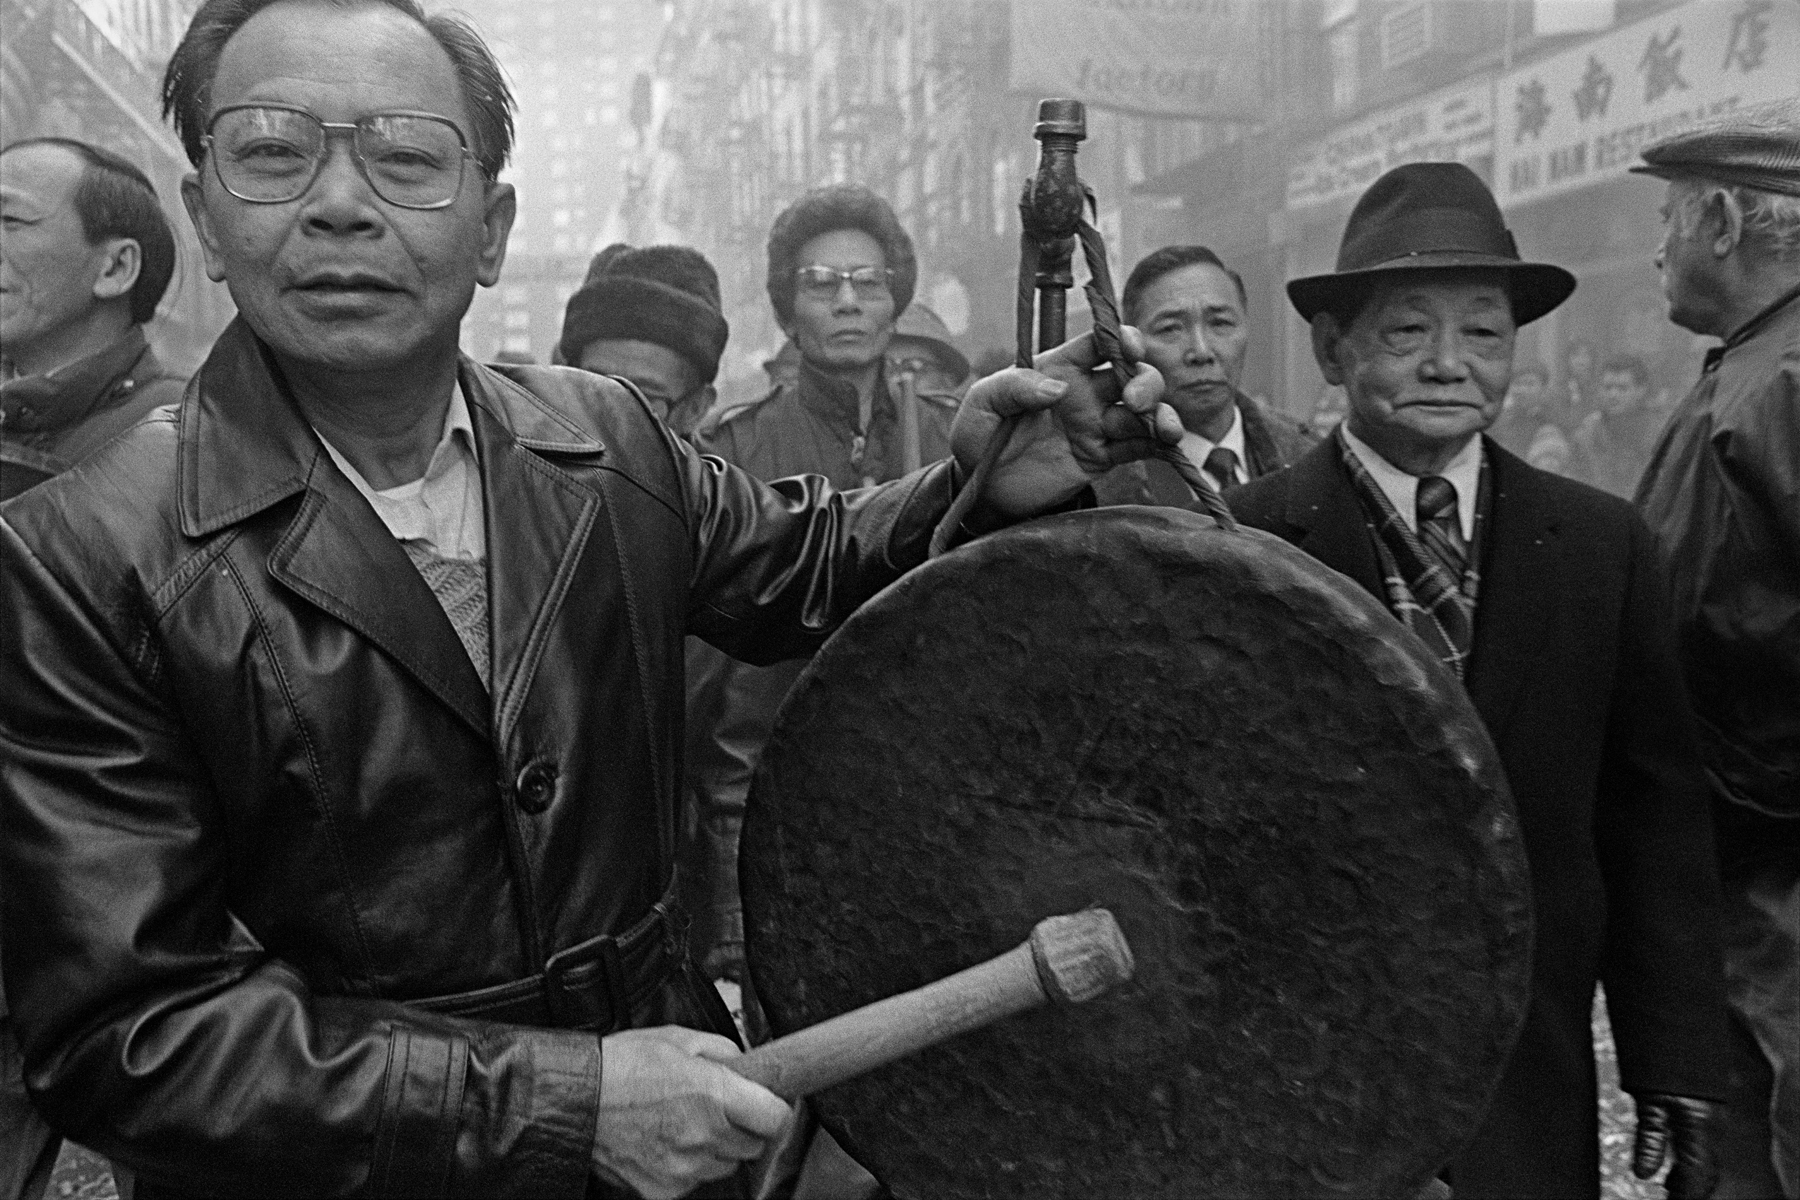 A group of men on Bayard St. during a Lunar New Year celebration in New York Chinatown in 1984. In the foreground a man is beating on a large gong.